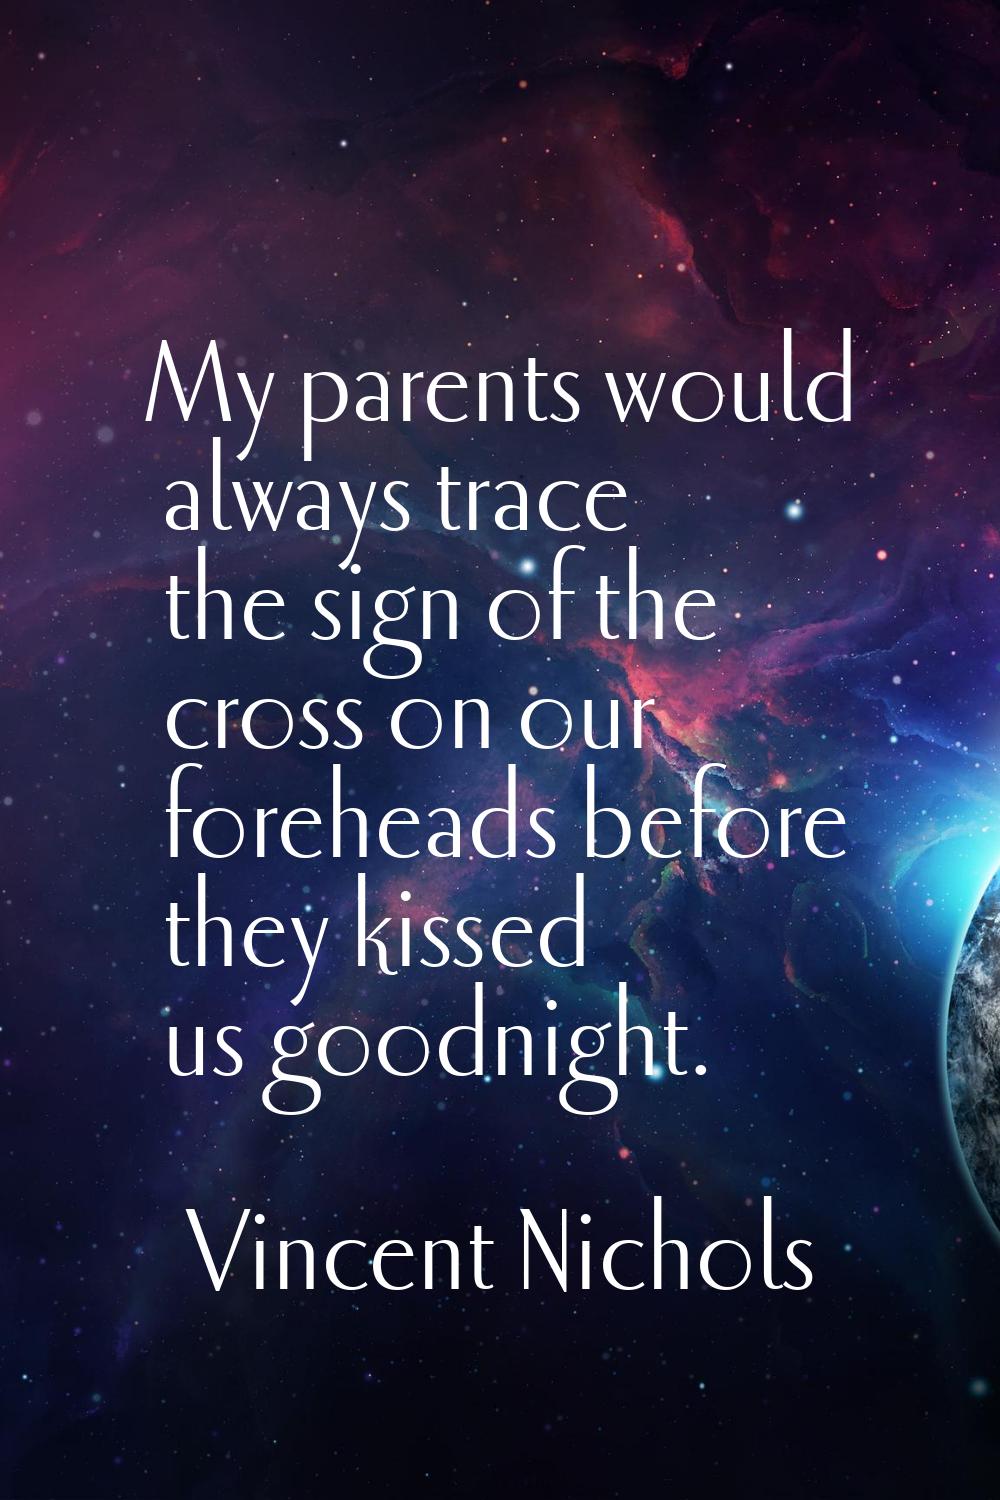 My parents would always trace the sign of the cross on our foreheads before they kissed us goodnigh